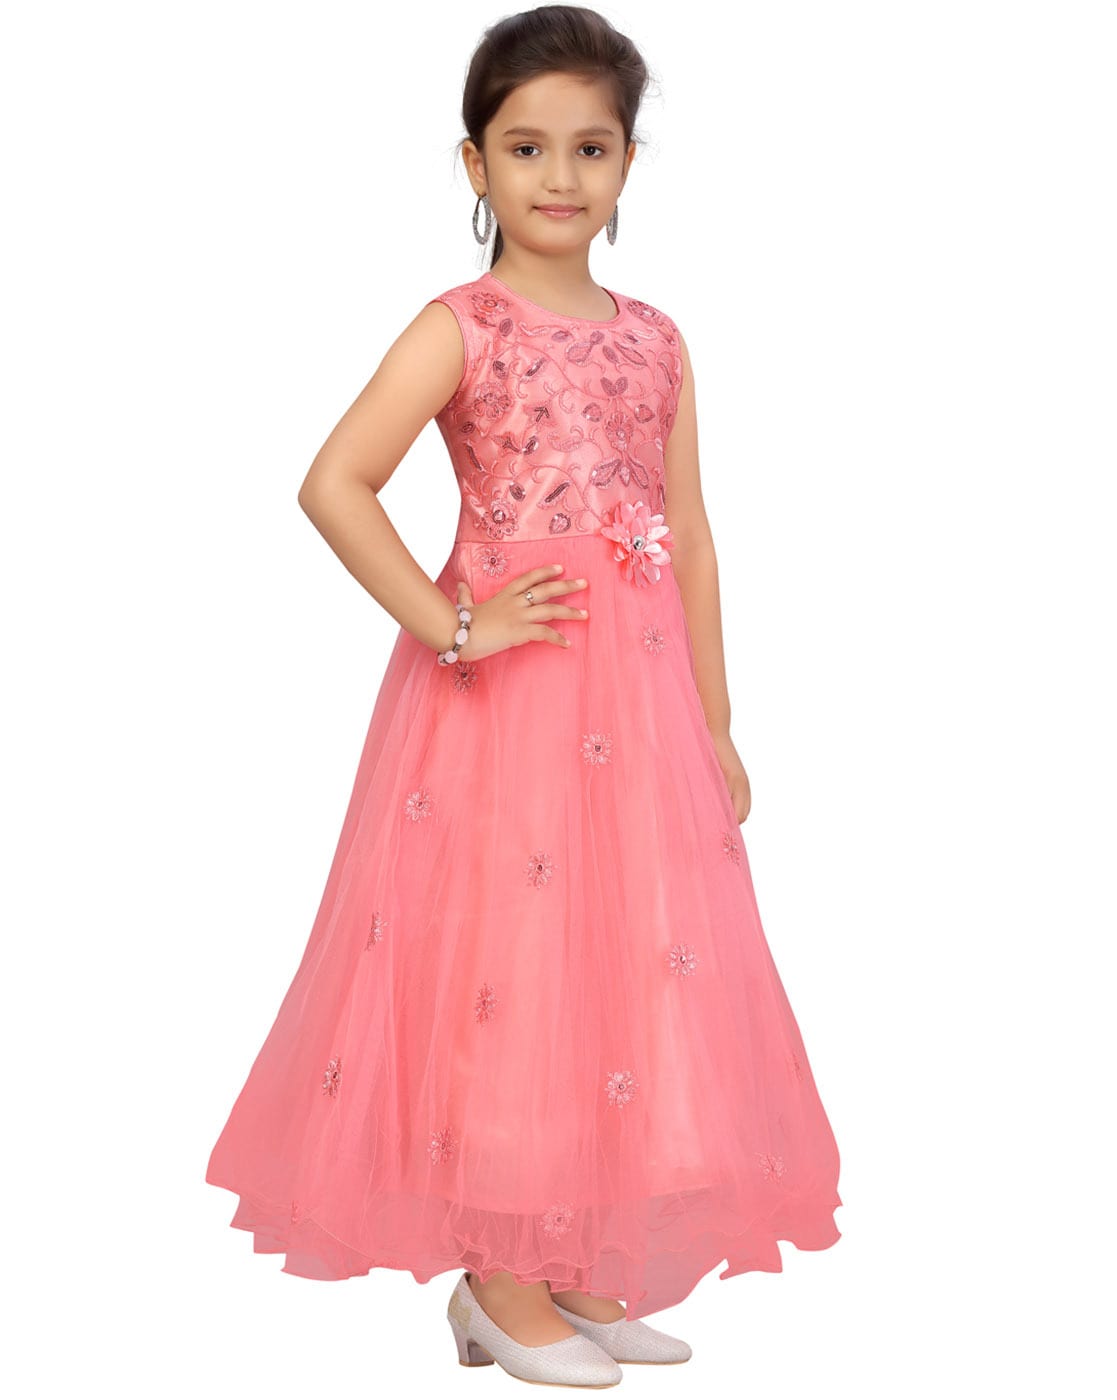 Gowns for Girls - Buy Girls Gowns Online in USA | Gowns for girls, Frocks  for girls, Girls frock design